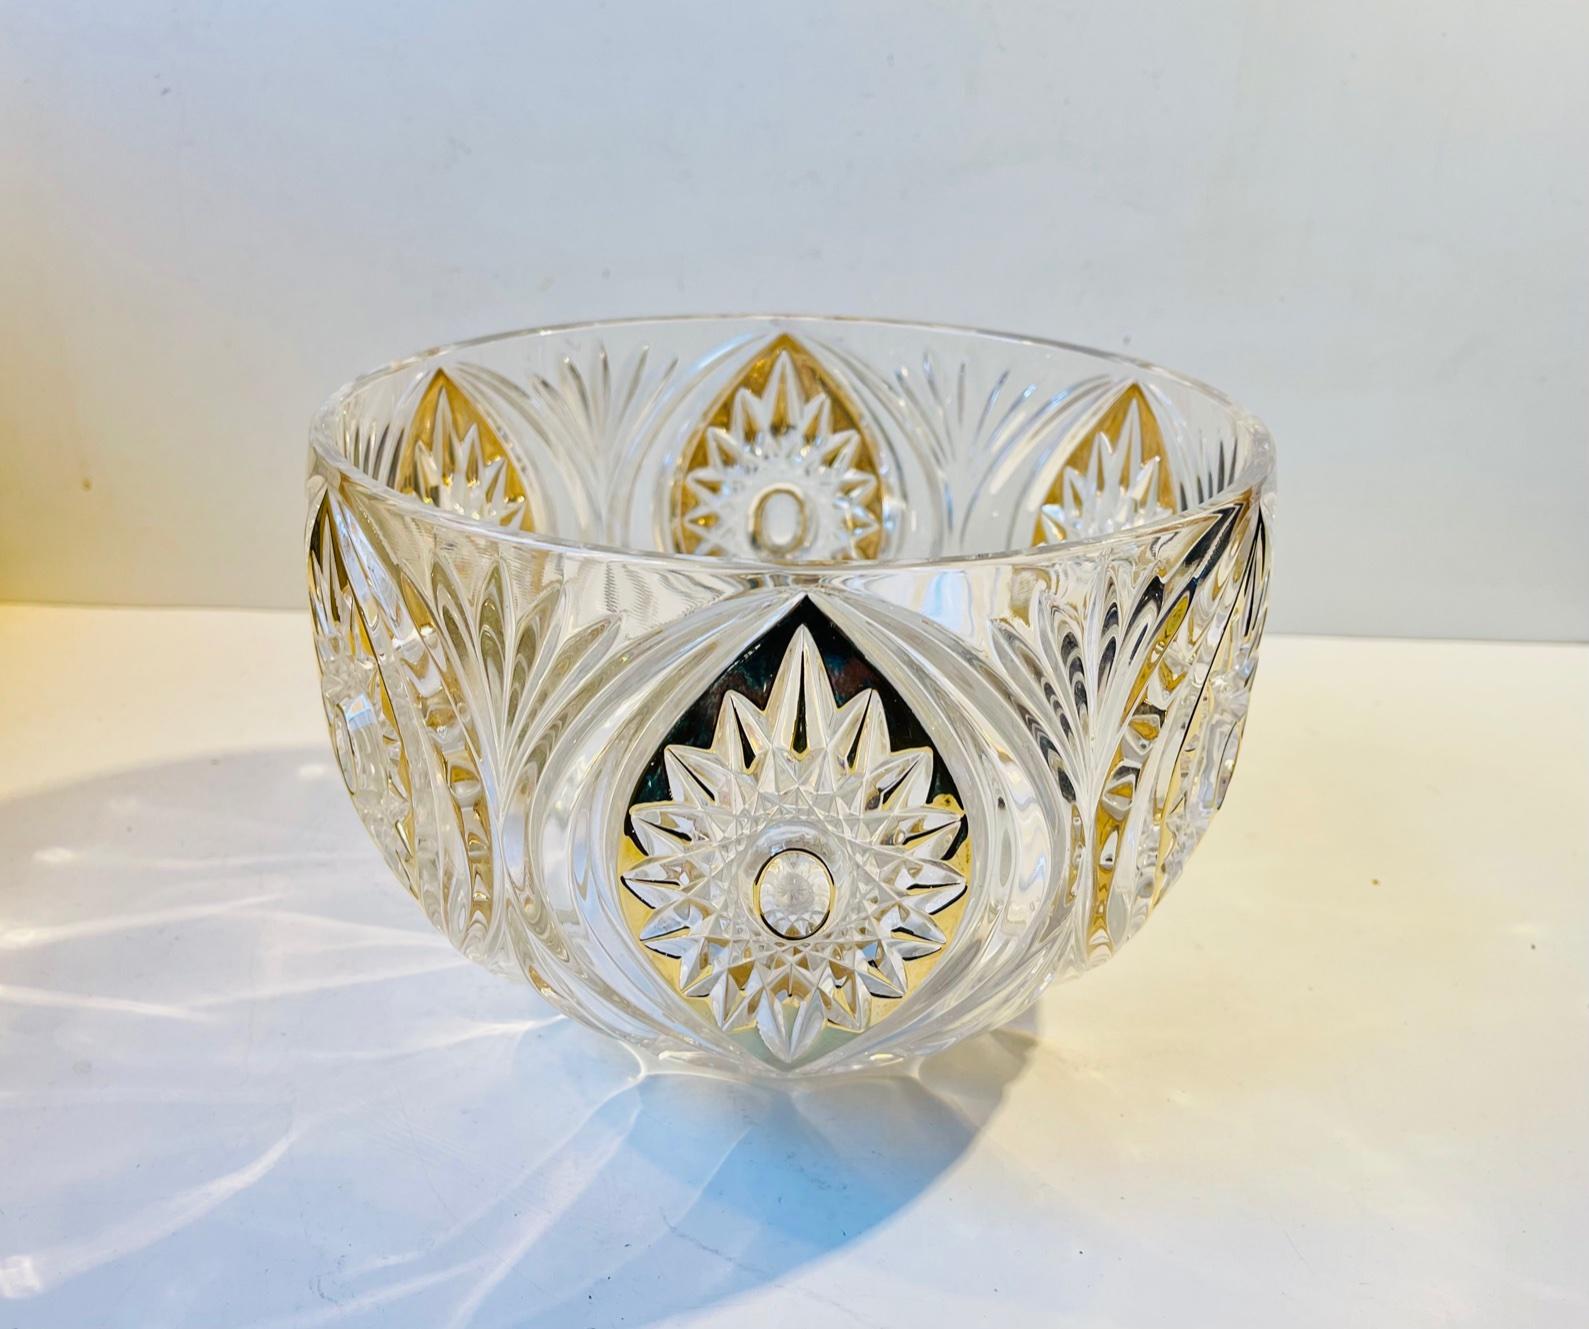 Bohemian centerpiece bowl in lead crystal decorated with gilt enamel and cut stars and floral impressions. It was manufactured in The Czech Republic (Bohemia) circa 1940-50. Measurements: Diameter: 23 cm, Height: 16 cm.